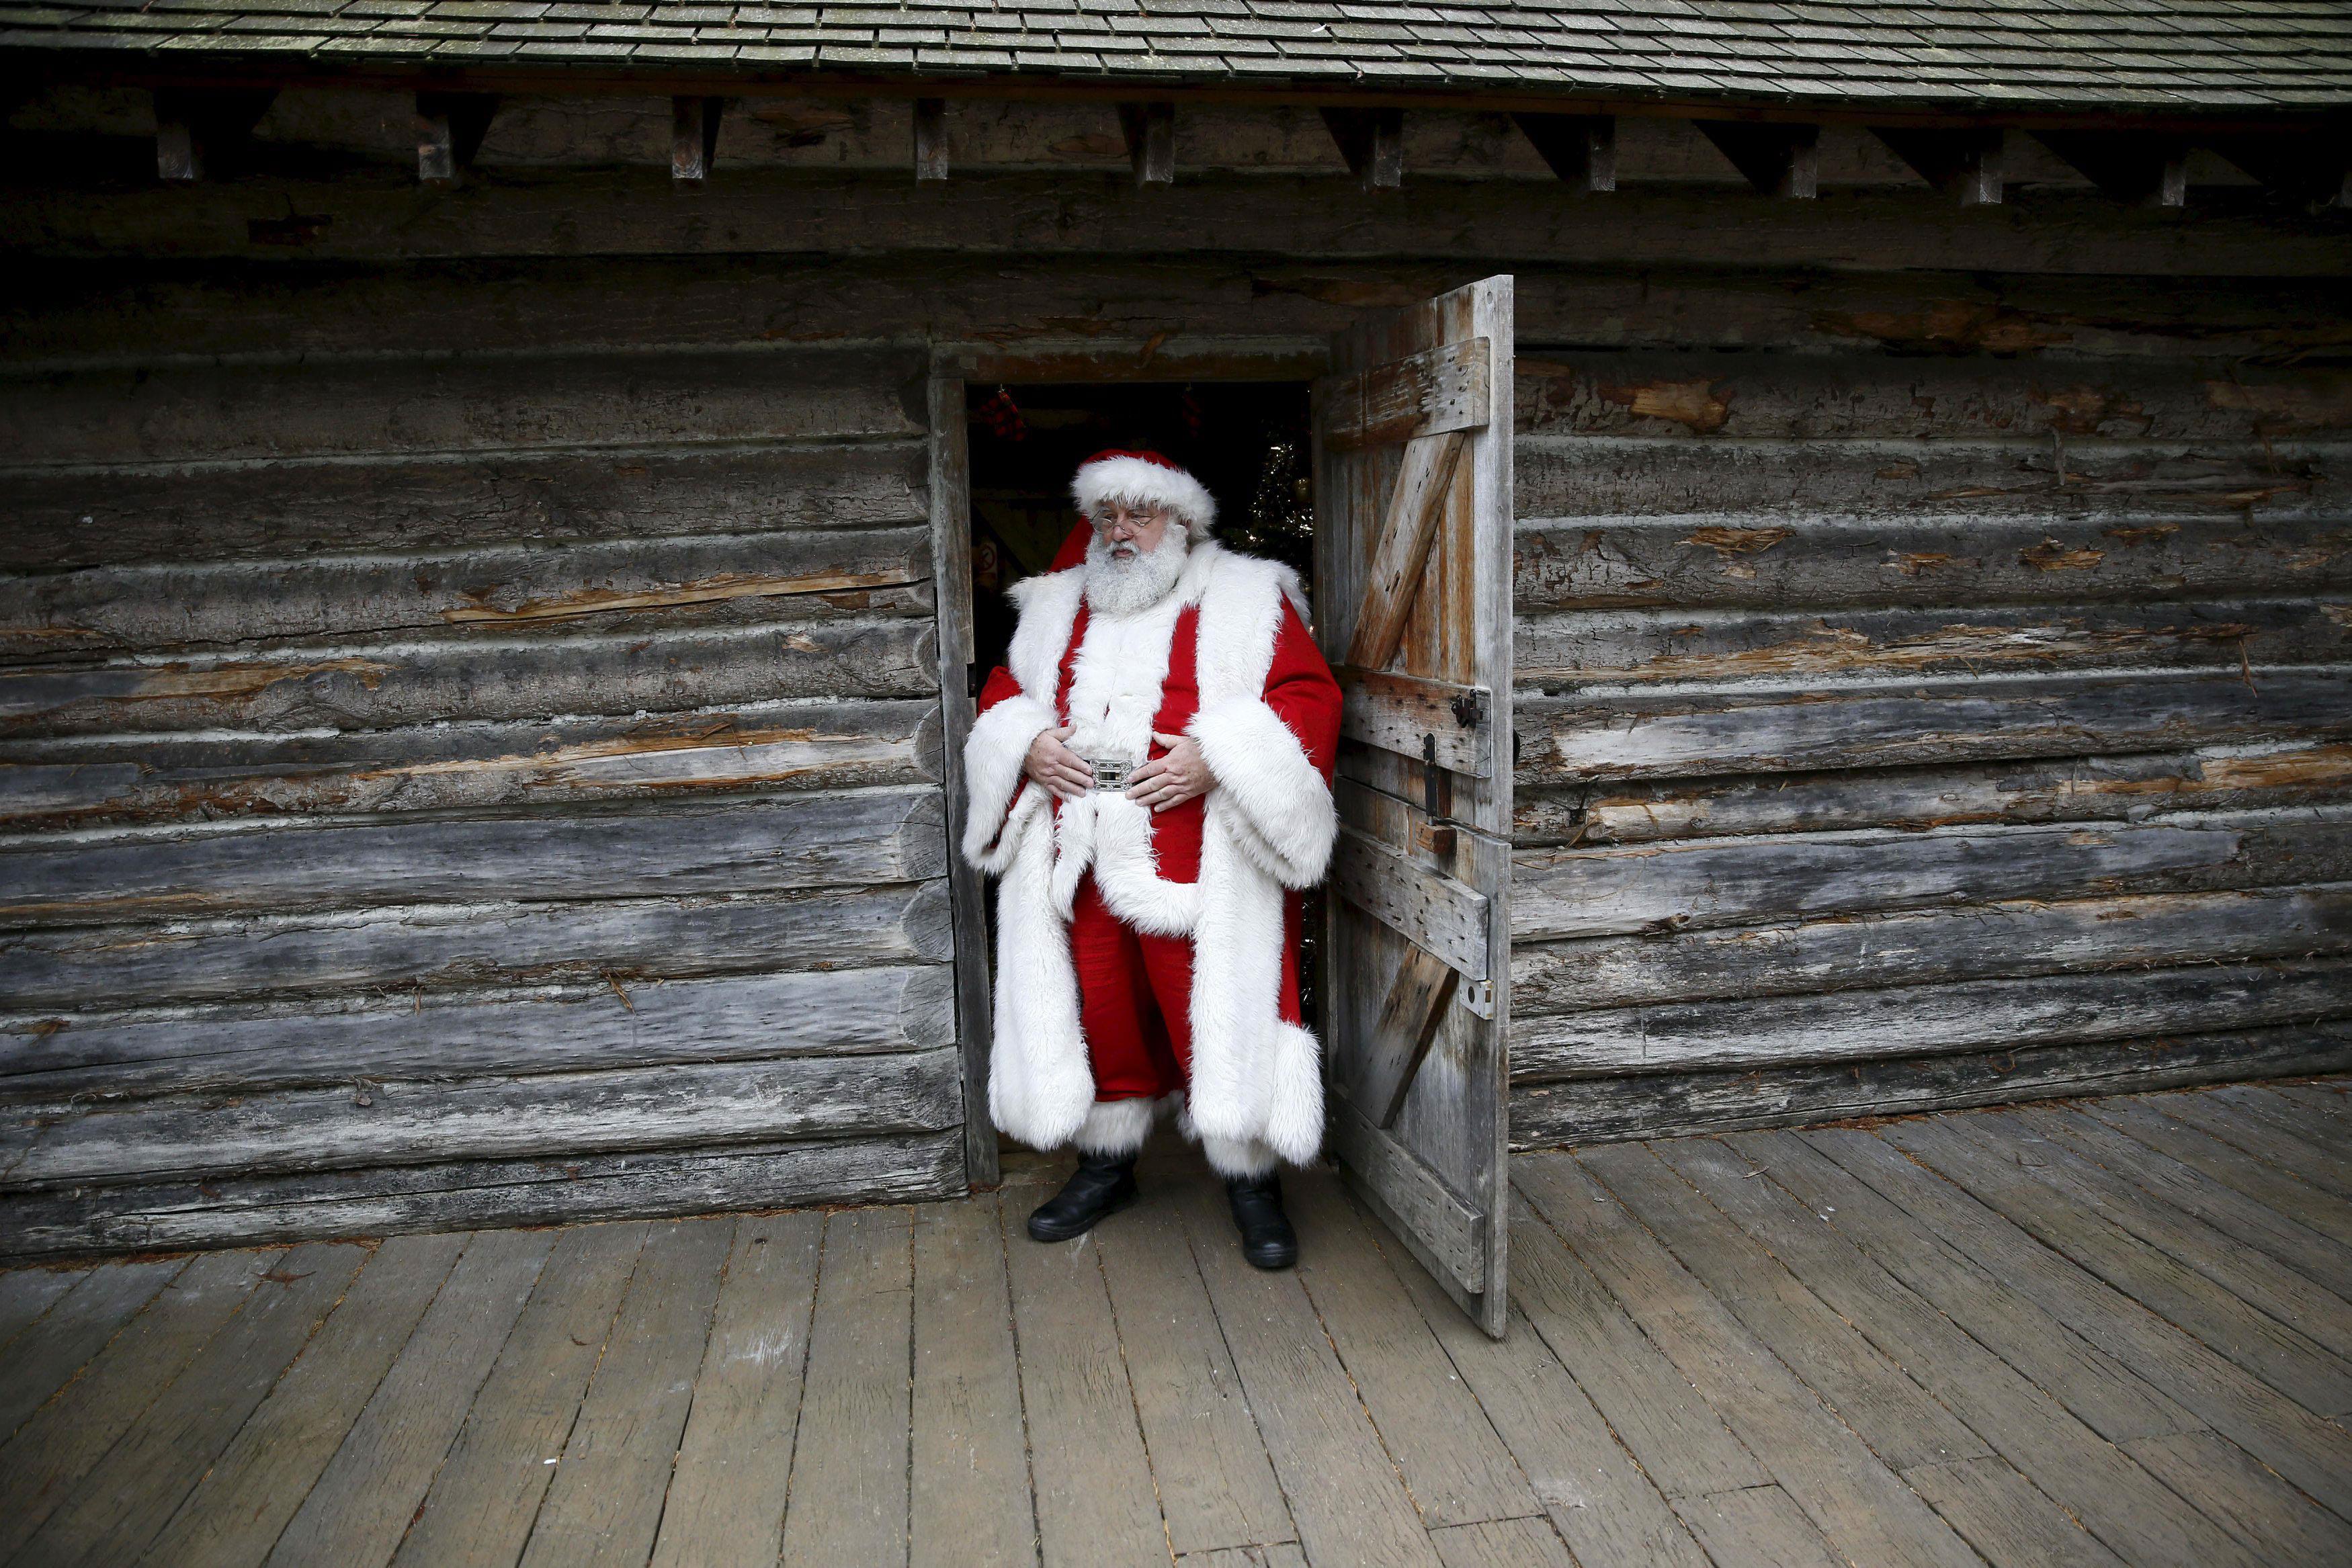 Wider Image: Santa Claus is coming to town